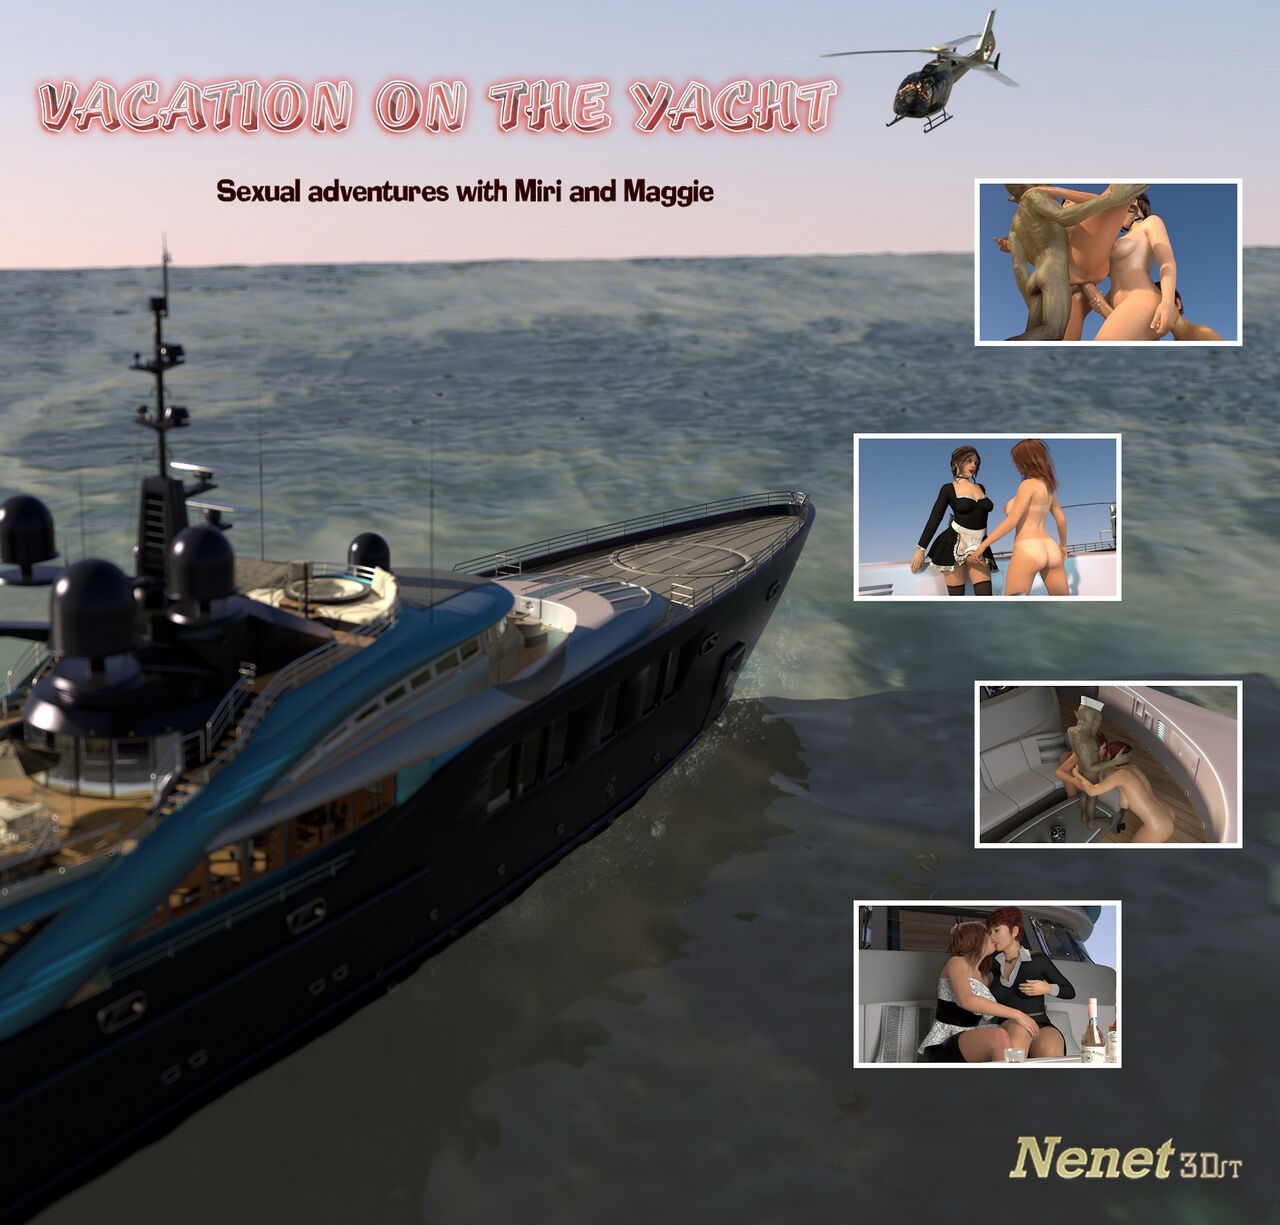 Nenet - Vacation on the Yacht (Textless) 0